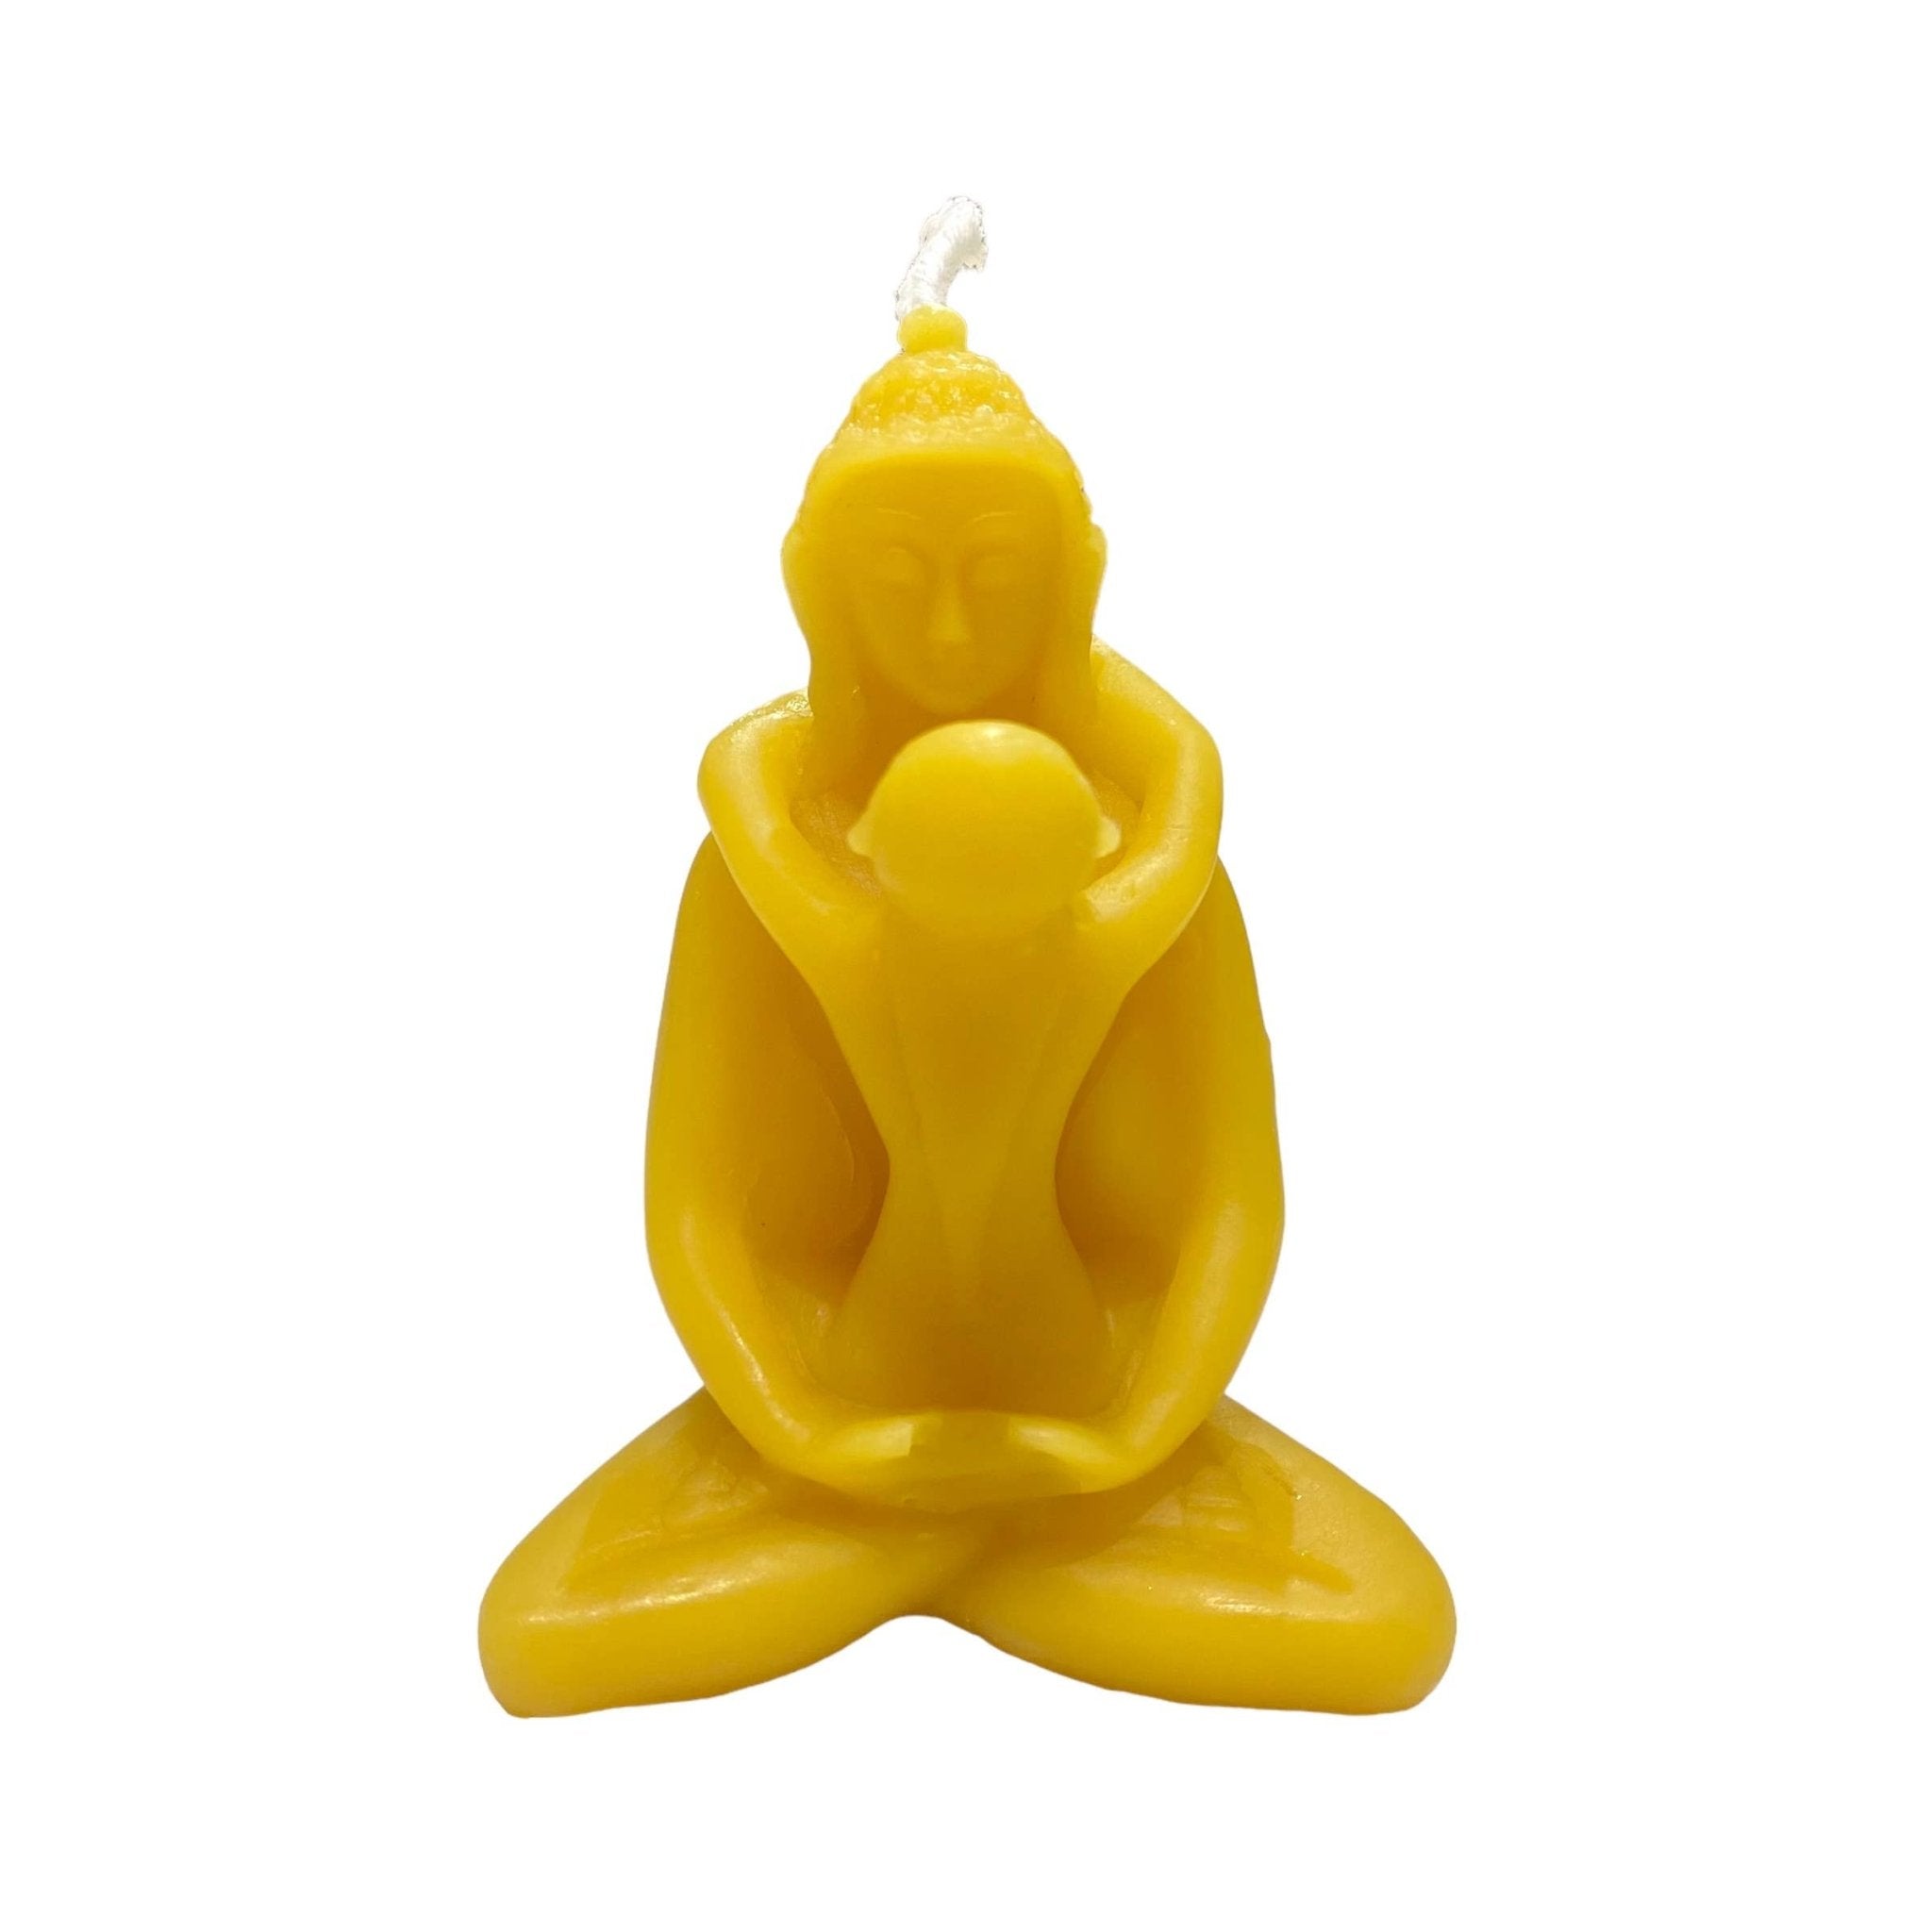 Sacred Union Beeswax Candle 3 Inches Tall - Spiral Circle